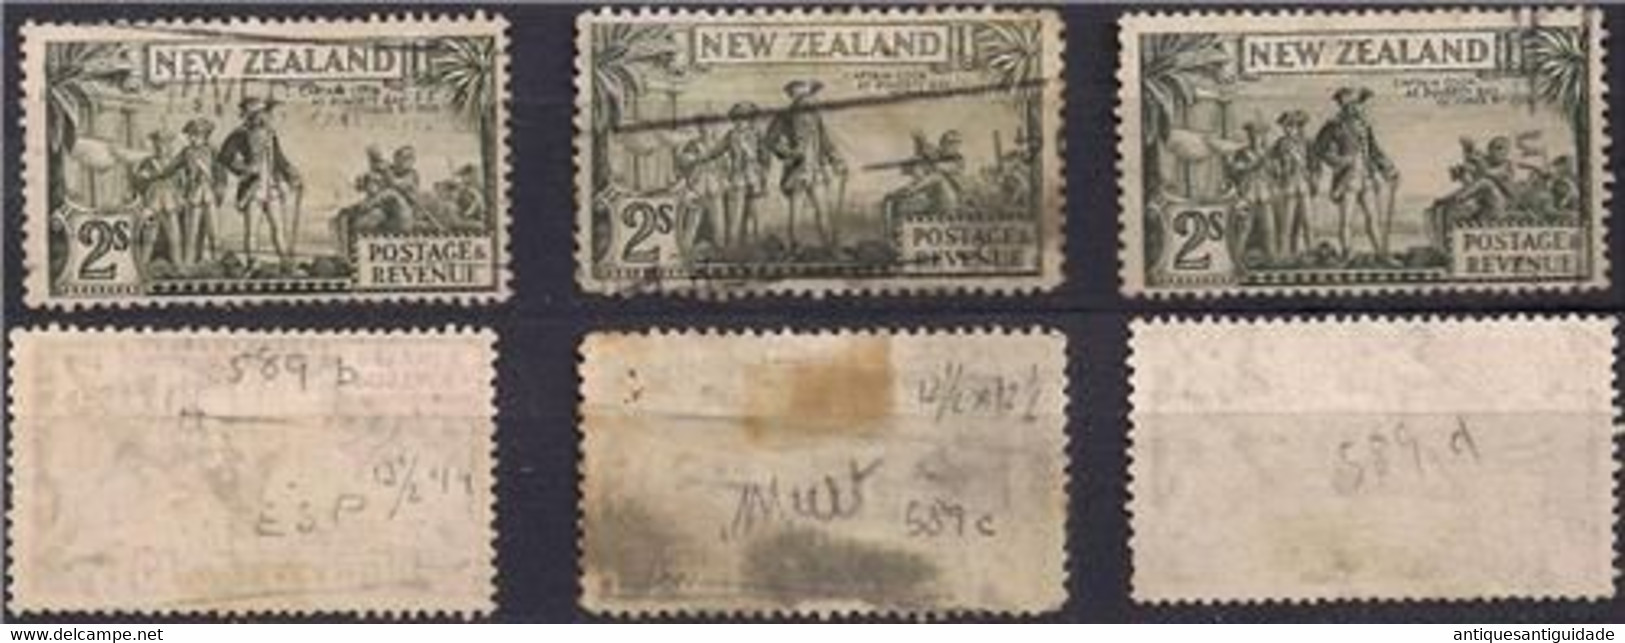 3x NEW ZEALAND 1935-36 2sh Olive-green Sg 568b,c,d Used With Varieties Dif Perfs - Usati